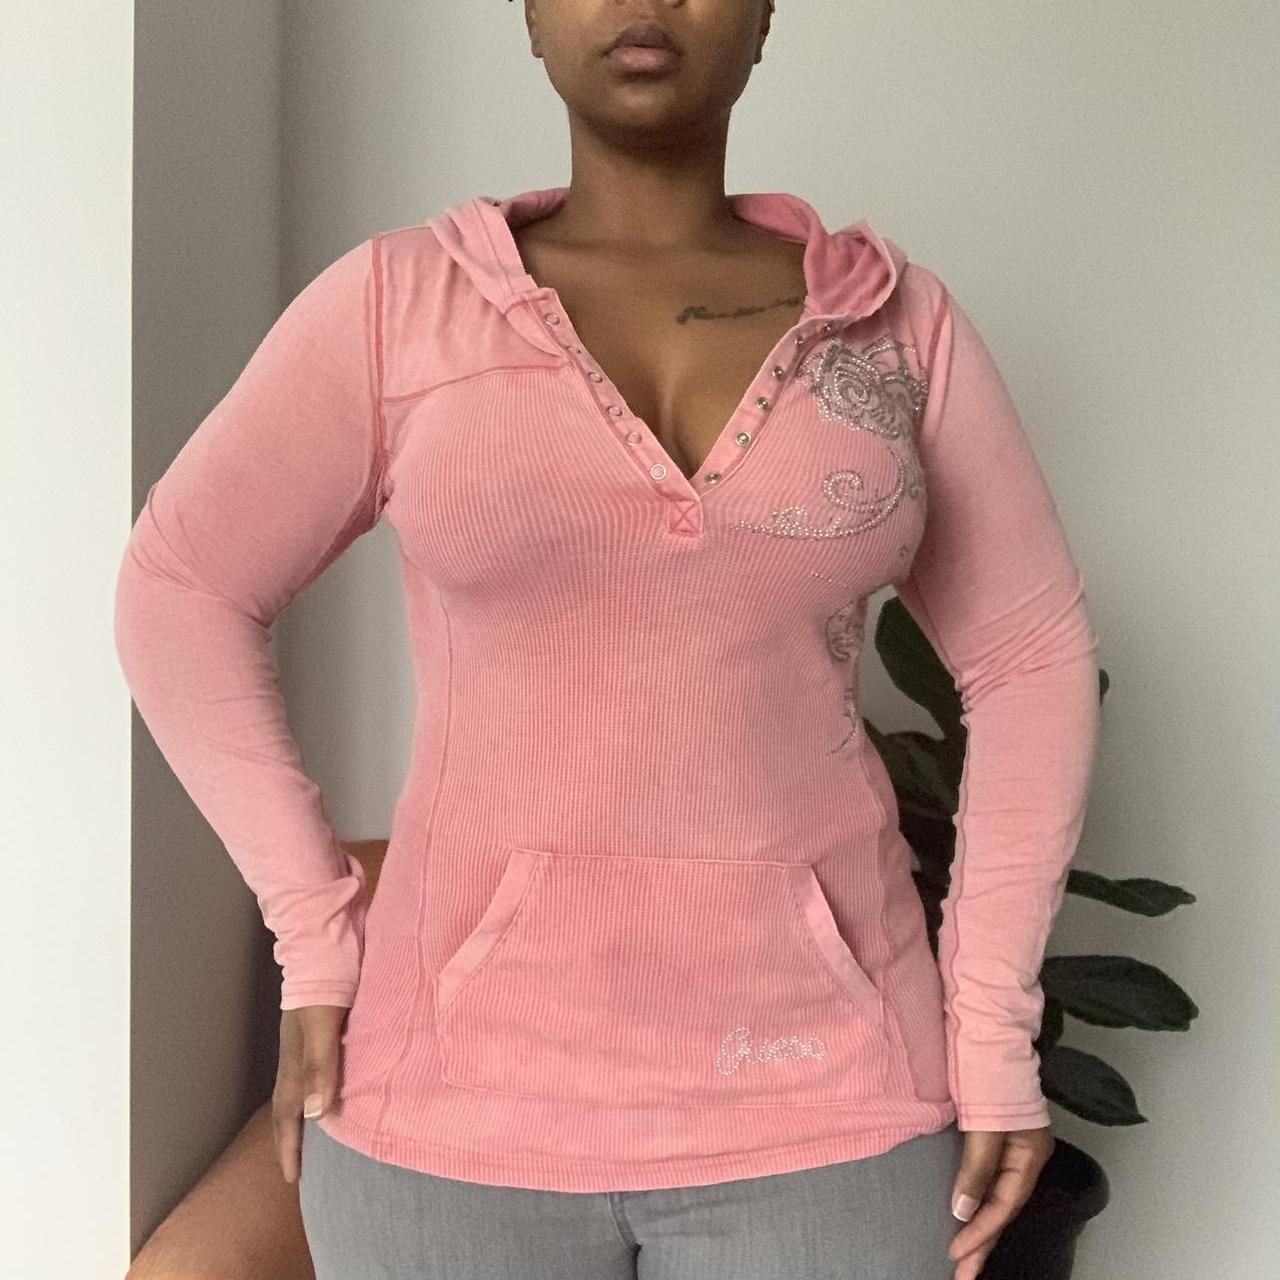 Guess Women's Pink and Silver Hoodie (4)